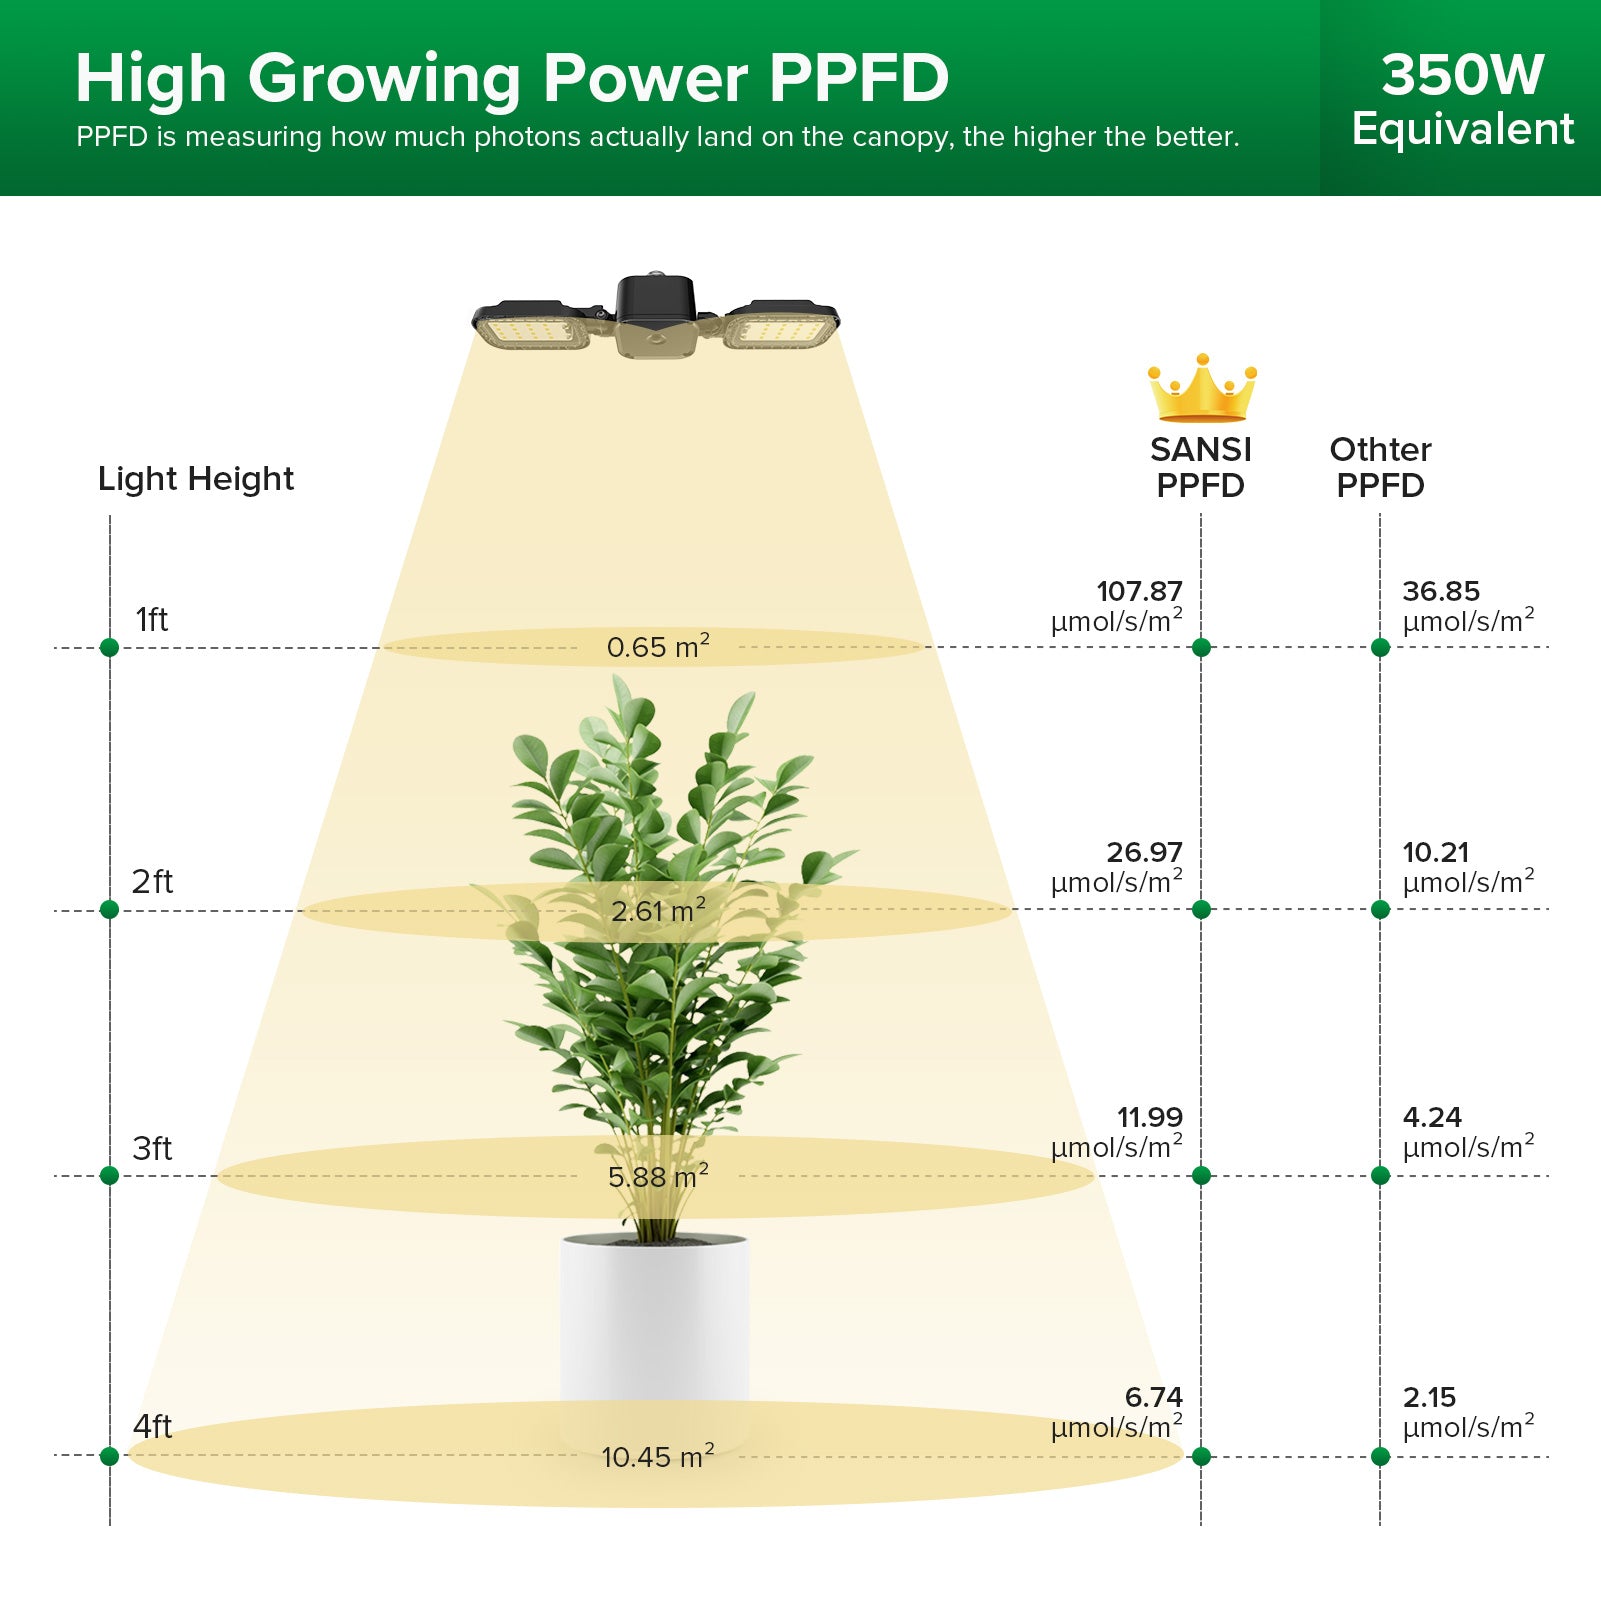 30W Panel LED Grow Light (US ONLY) has high growing power PPFD，PPFD:107.87μmol/s/㎡@1ft.